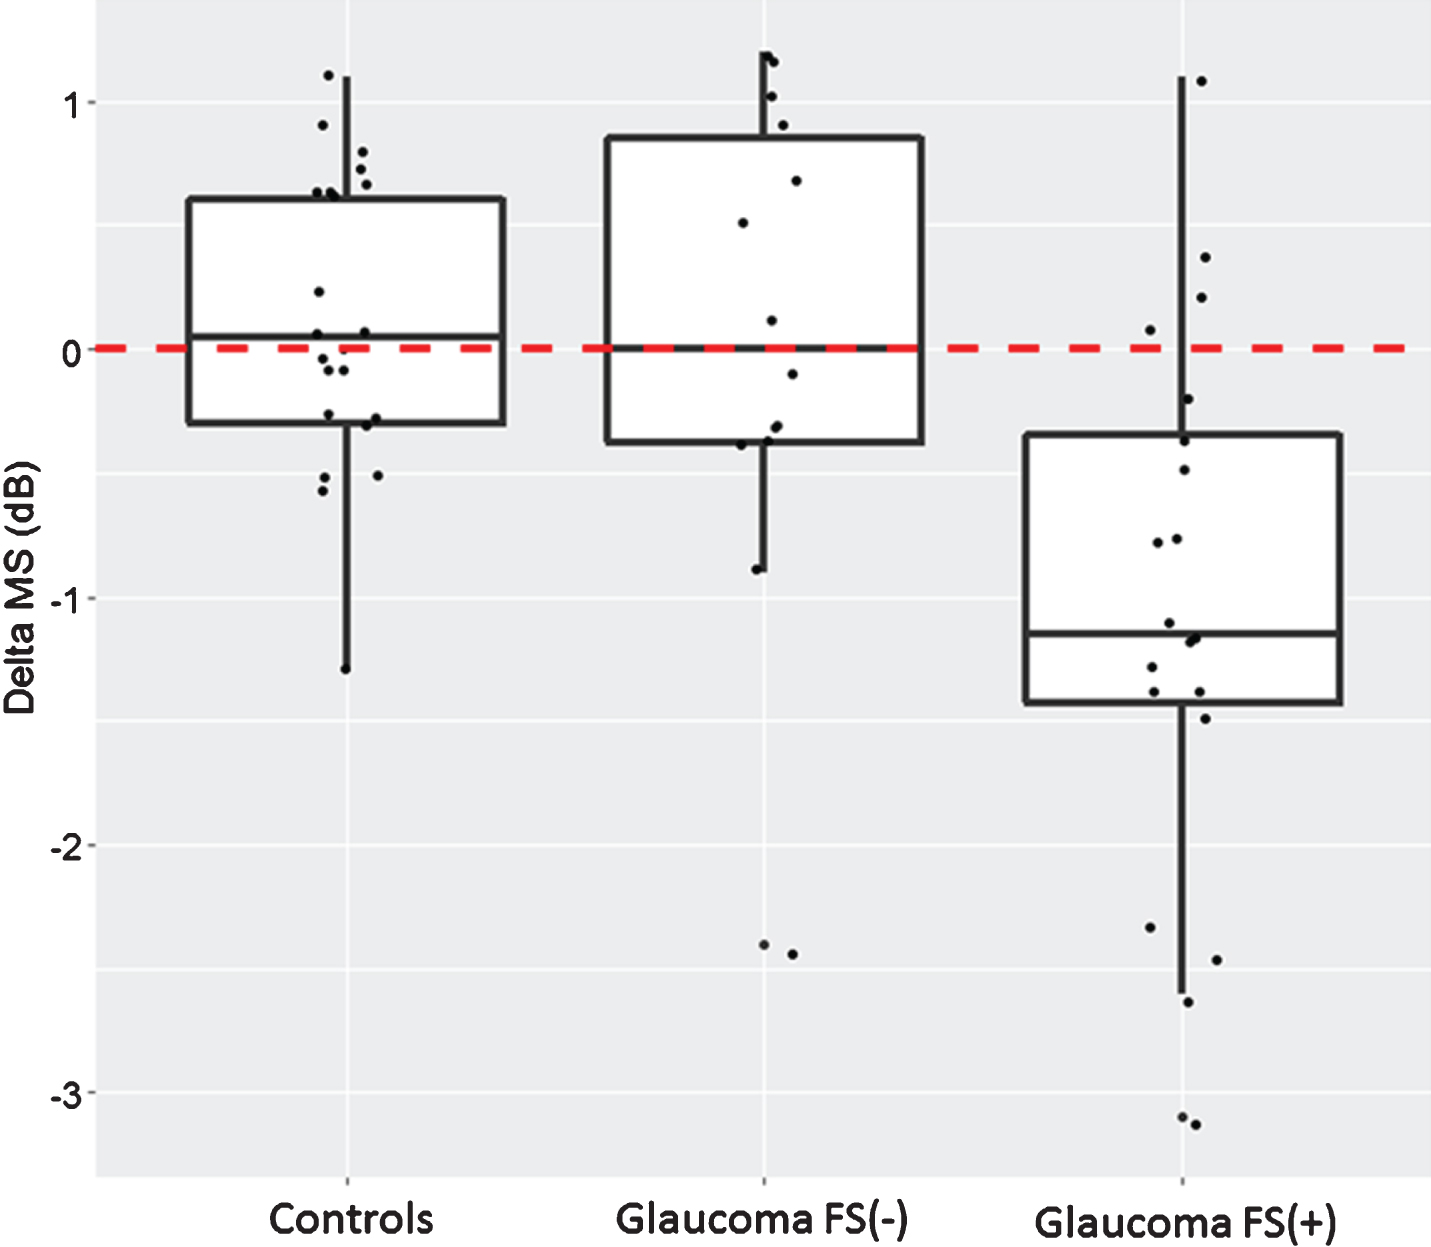 Perimetric response to cold provocation. MS = mean sensitivity; delta MS = MS after cold provocation –MS baseline. Results are represented as box-plots in controls, glaucoma patients without Flammer syndrome FS(–), and glaucoma patients with Flammer syndrome FS(+). Each boxplot represents the median and the first and third quartile. A positive delta indicates an improvement; a negative delta, a deterioration.